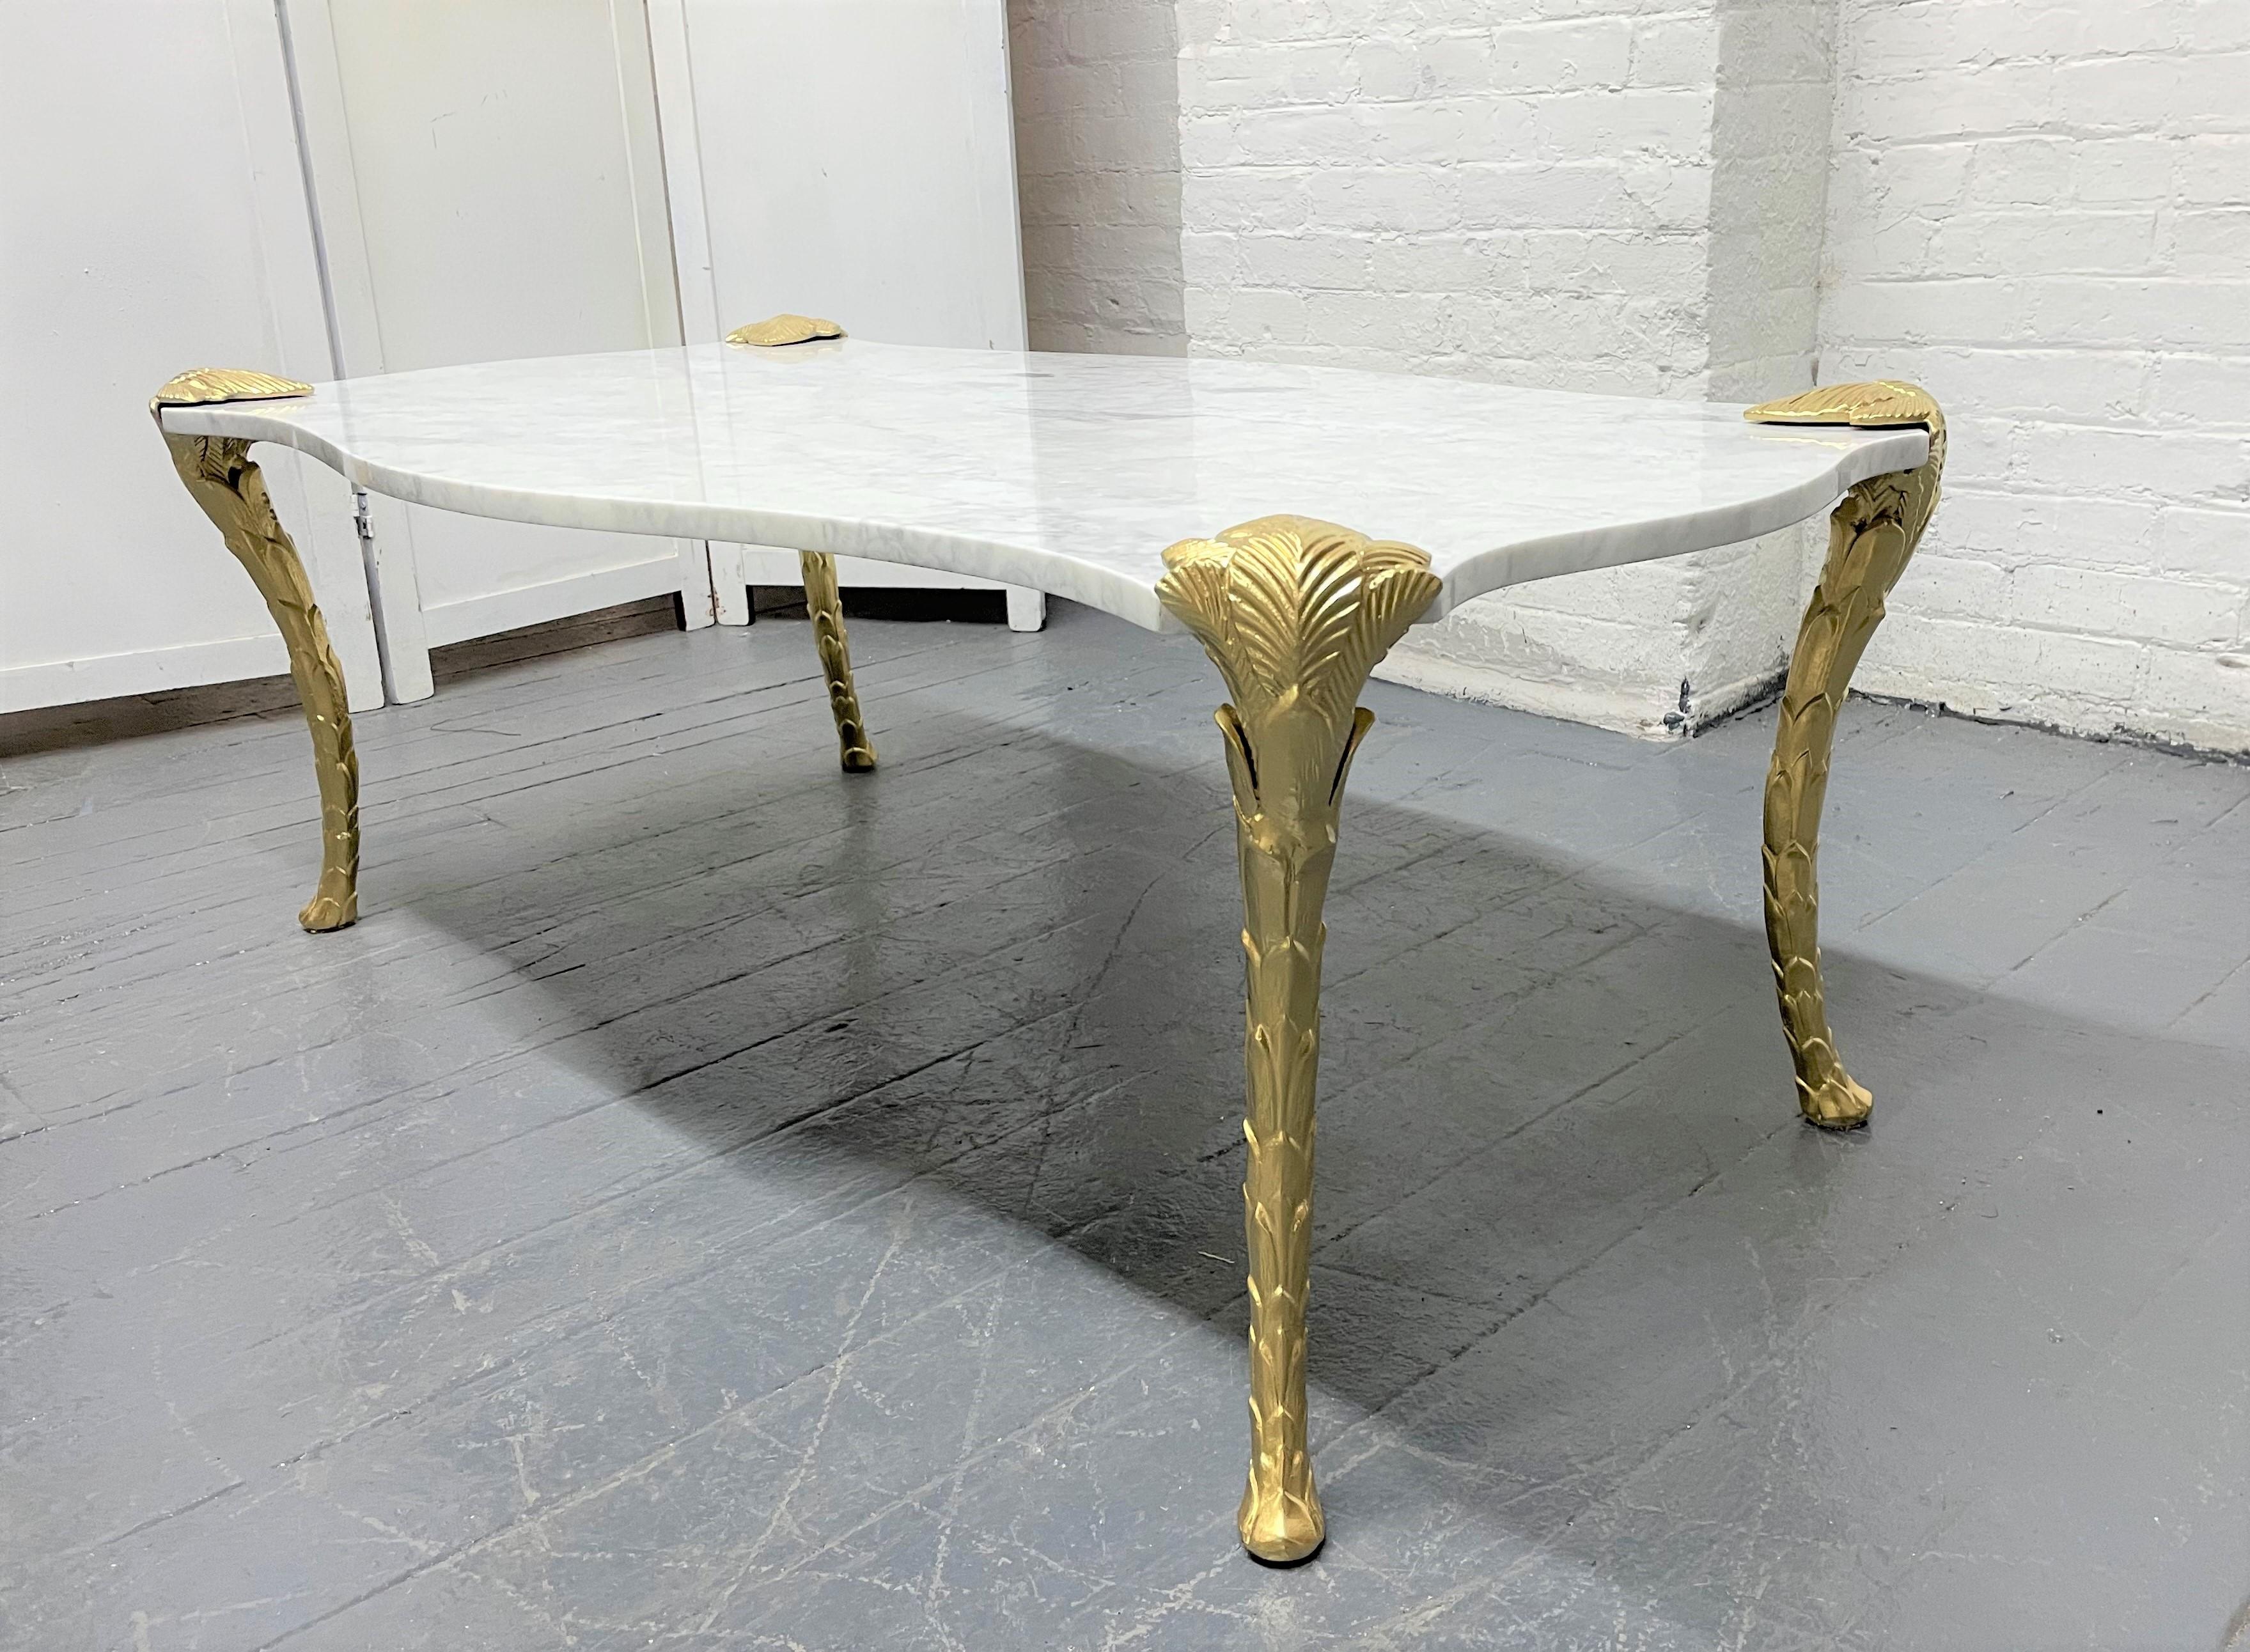 Decorative Carrara marble top coffee table with floral legs. The legs are metal with a gold painted floral pattern. Style of Maison Charles.